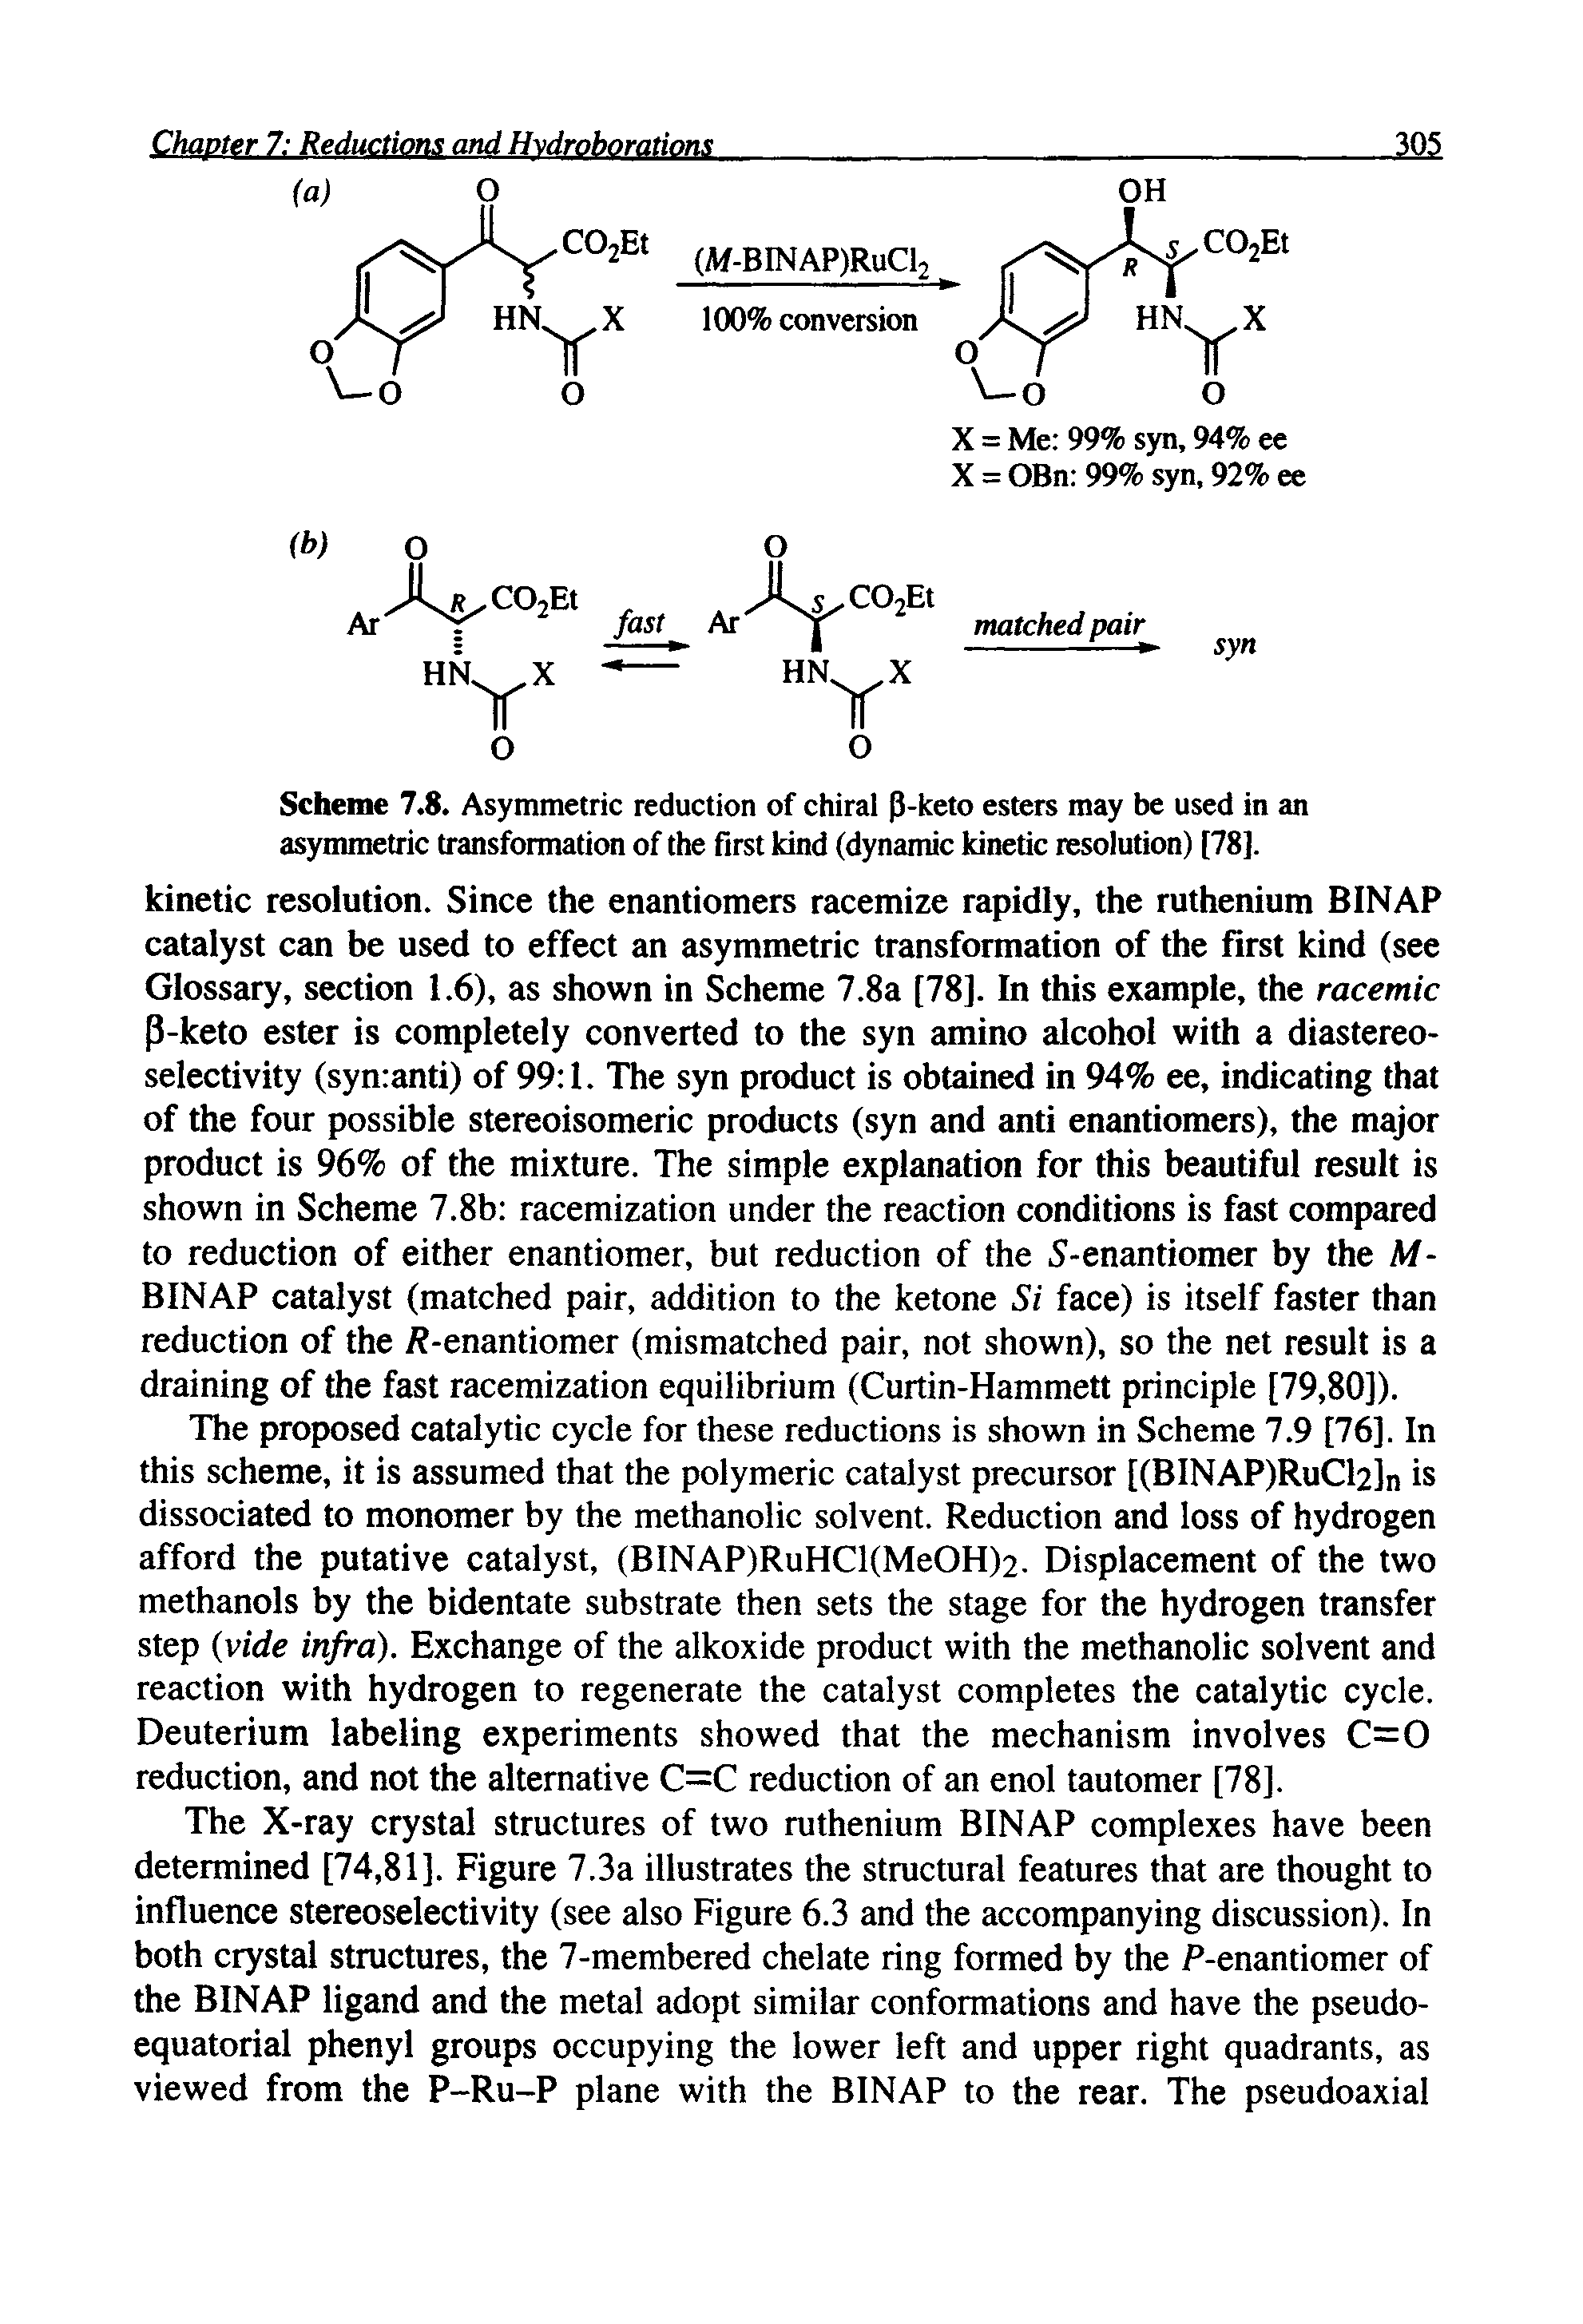 Scheme 7.8. Asymmetric reduction of chiral P-keto esters may be used in an asymmetric transformation of the first kind (dynamic kinetic resolution) [78],...